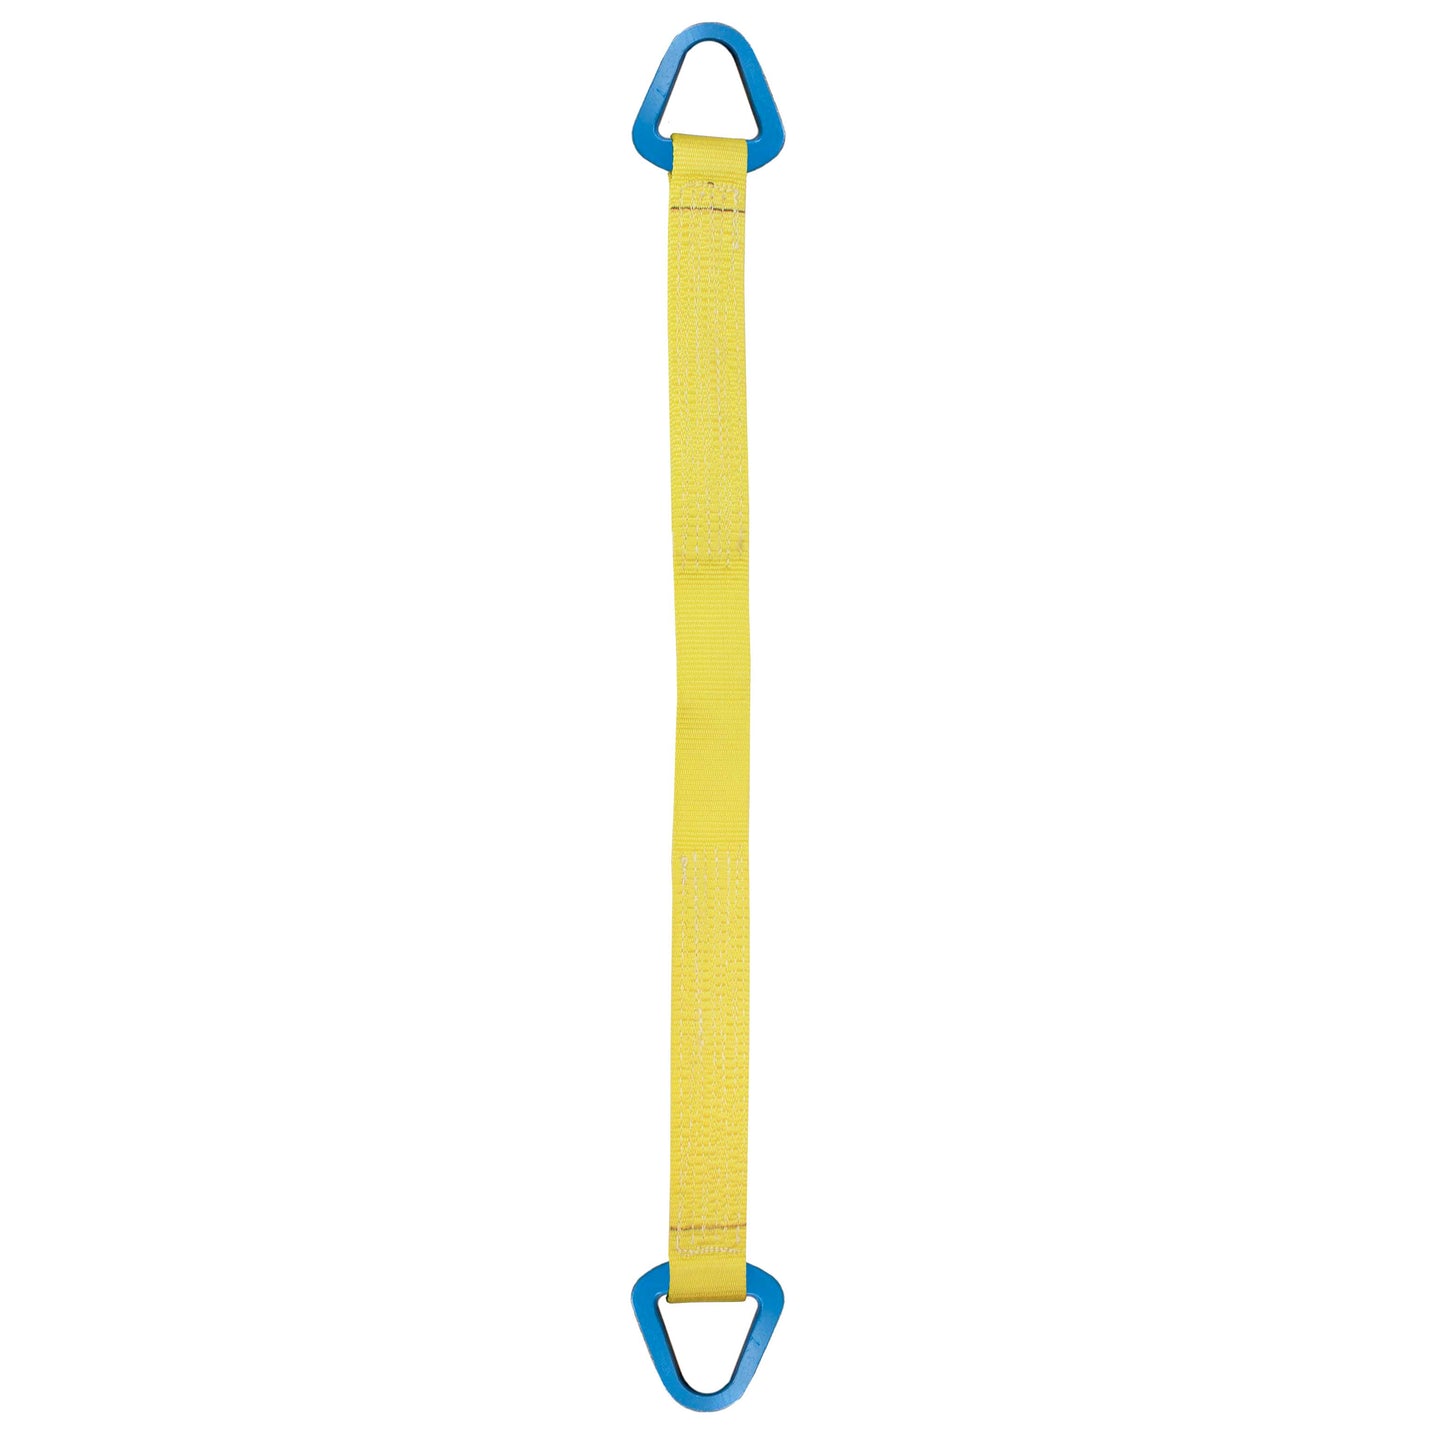 Nylon Lifting Sling Triangle 8 inch x 20 foot 2ply image 1 of 2